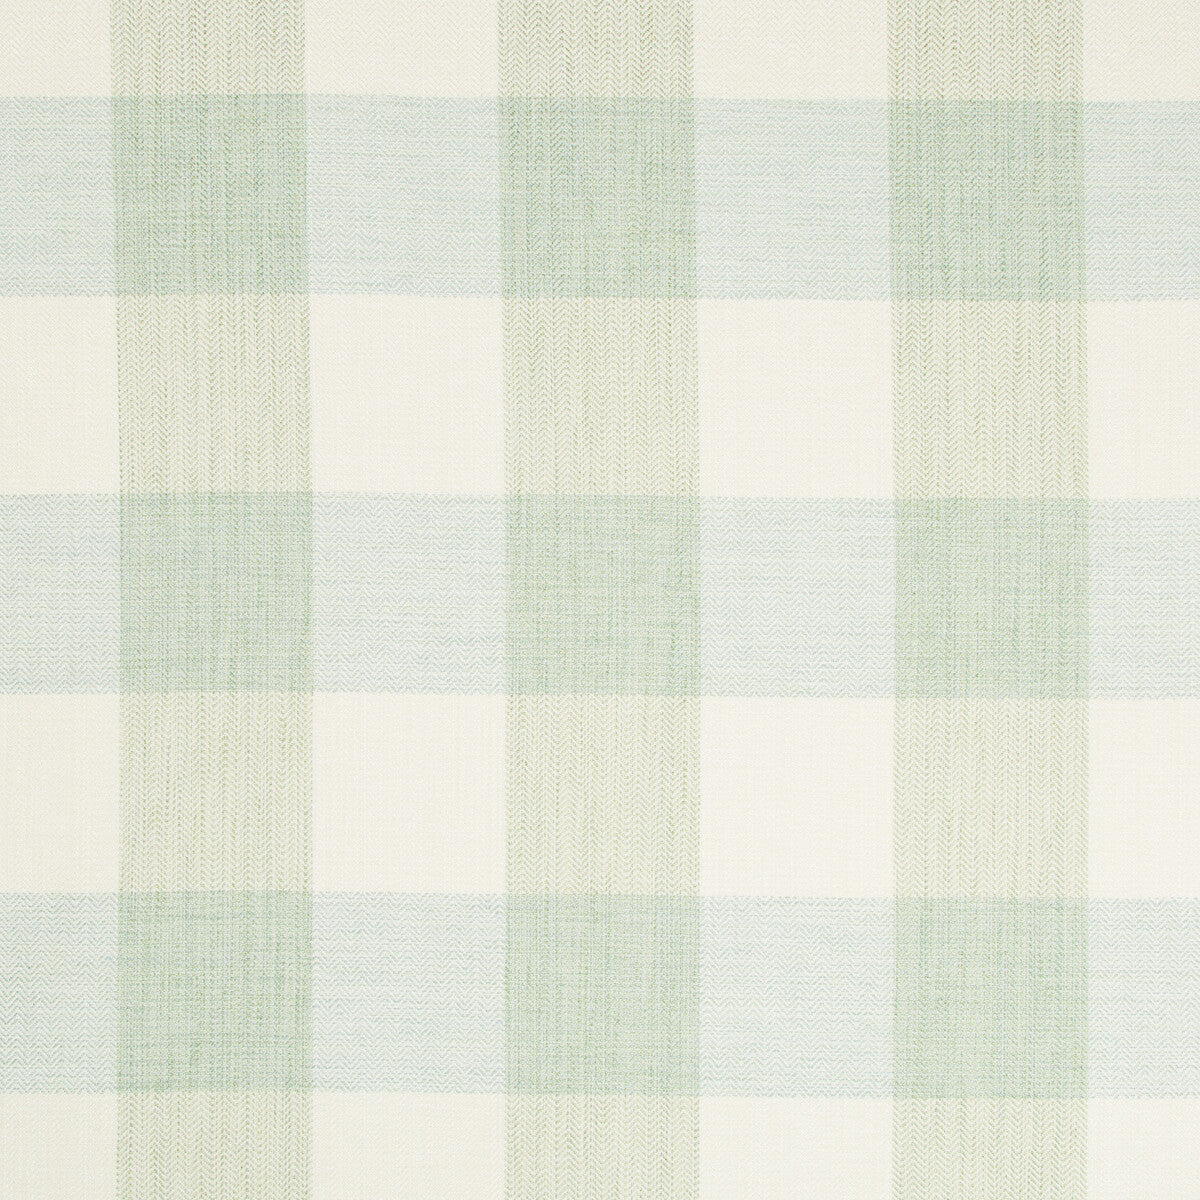 Barnsdale fabric in leaf color - pattern 35306.3.0 - by Kravet Basics in the Greenwich collection